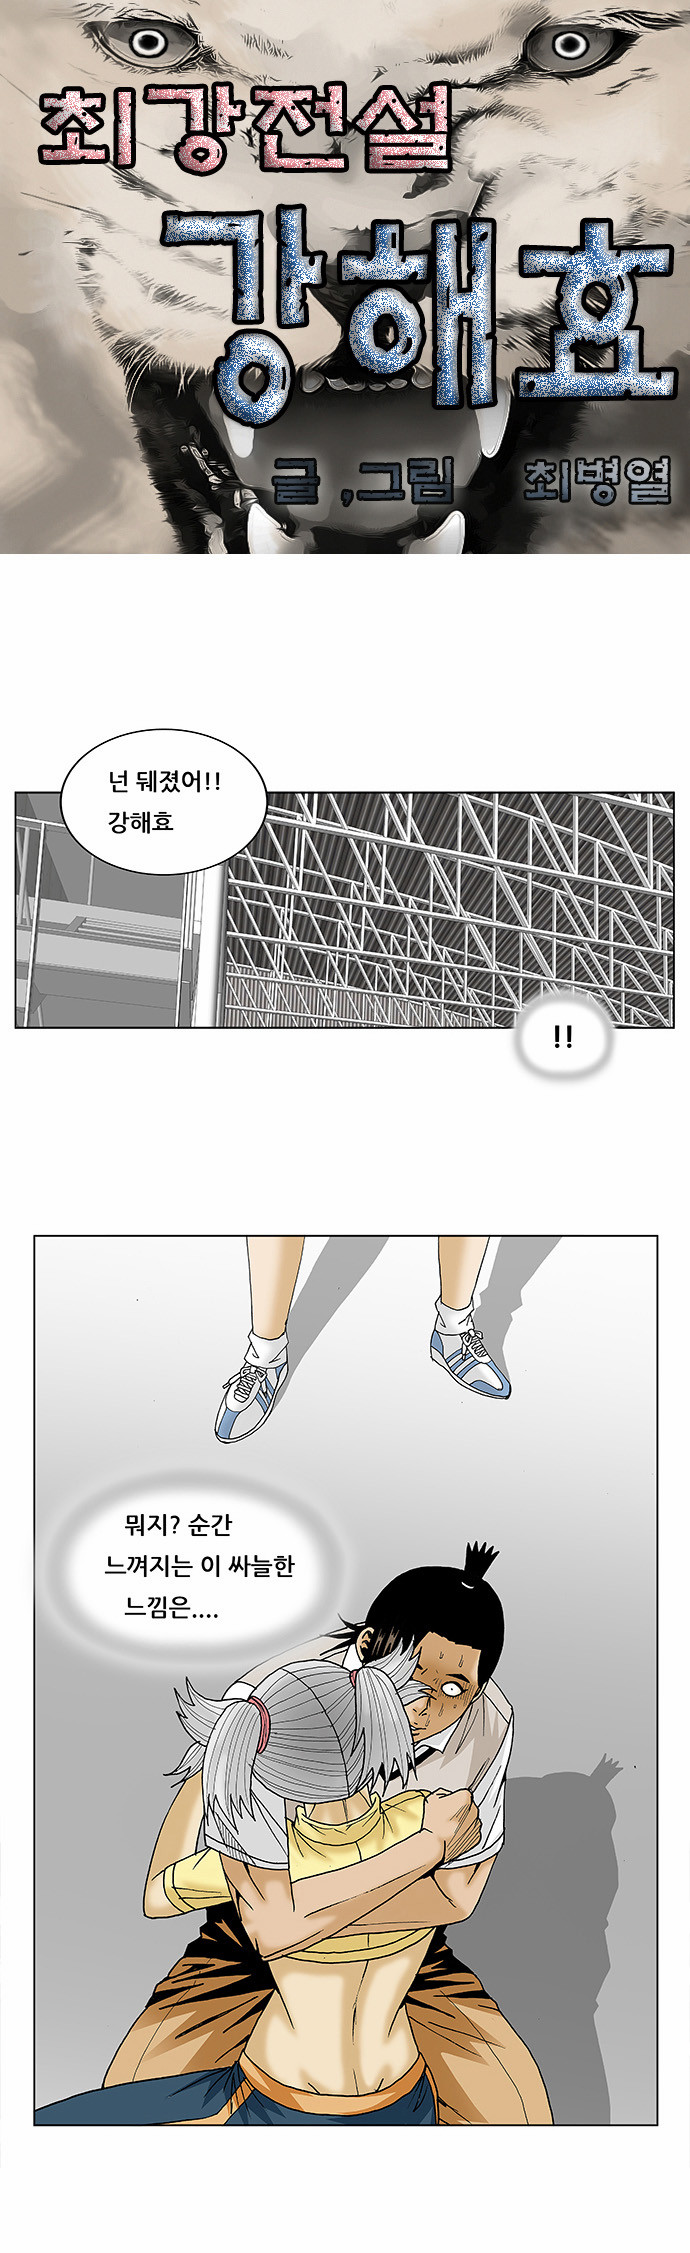 Ultimate Legend - Kang Hae Hyo - Chapter 78 - Page 4